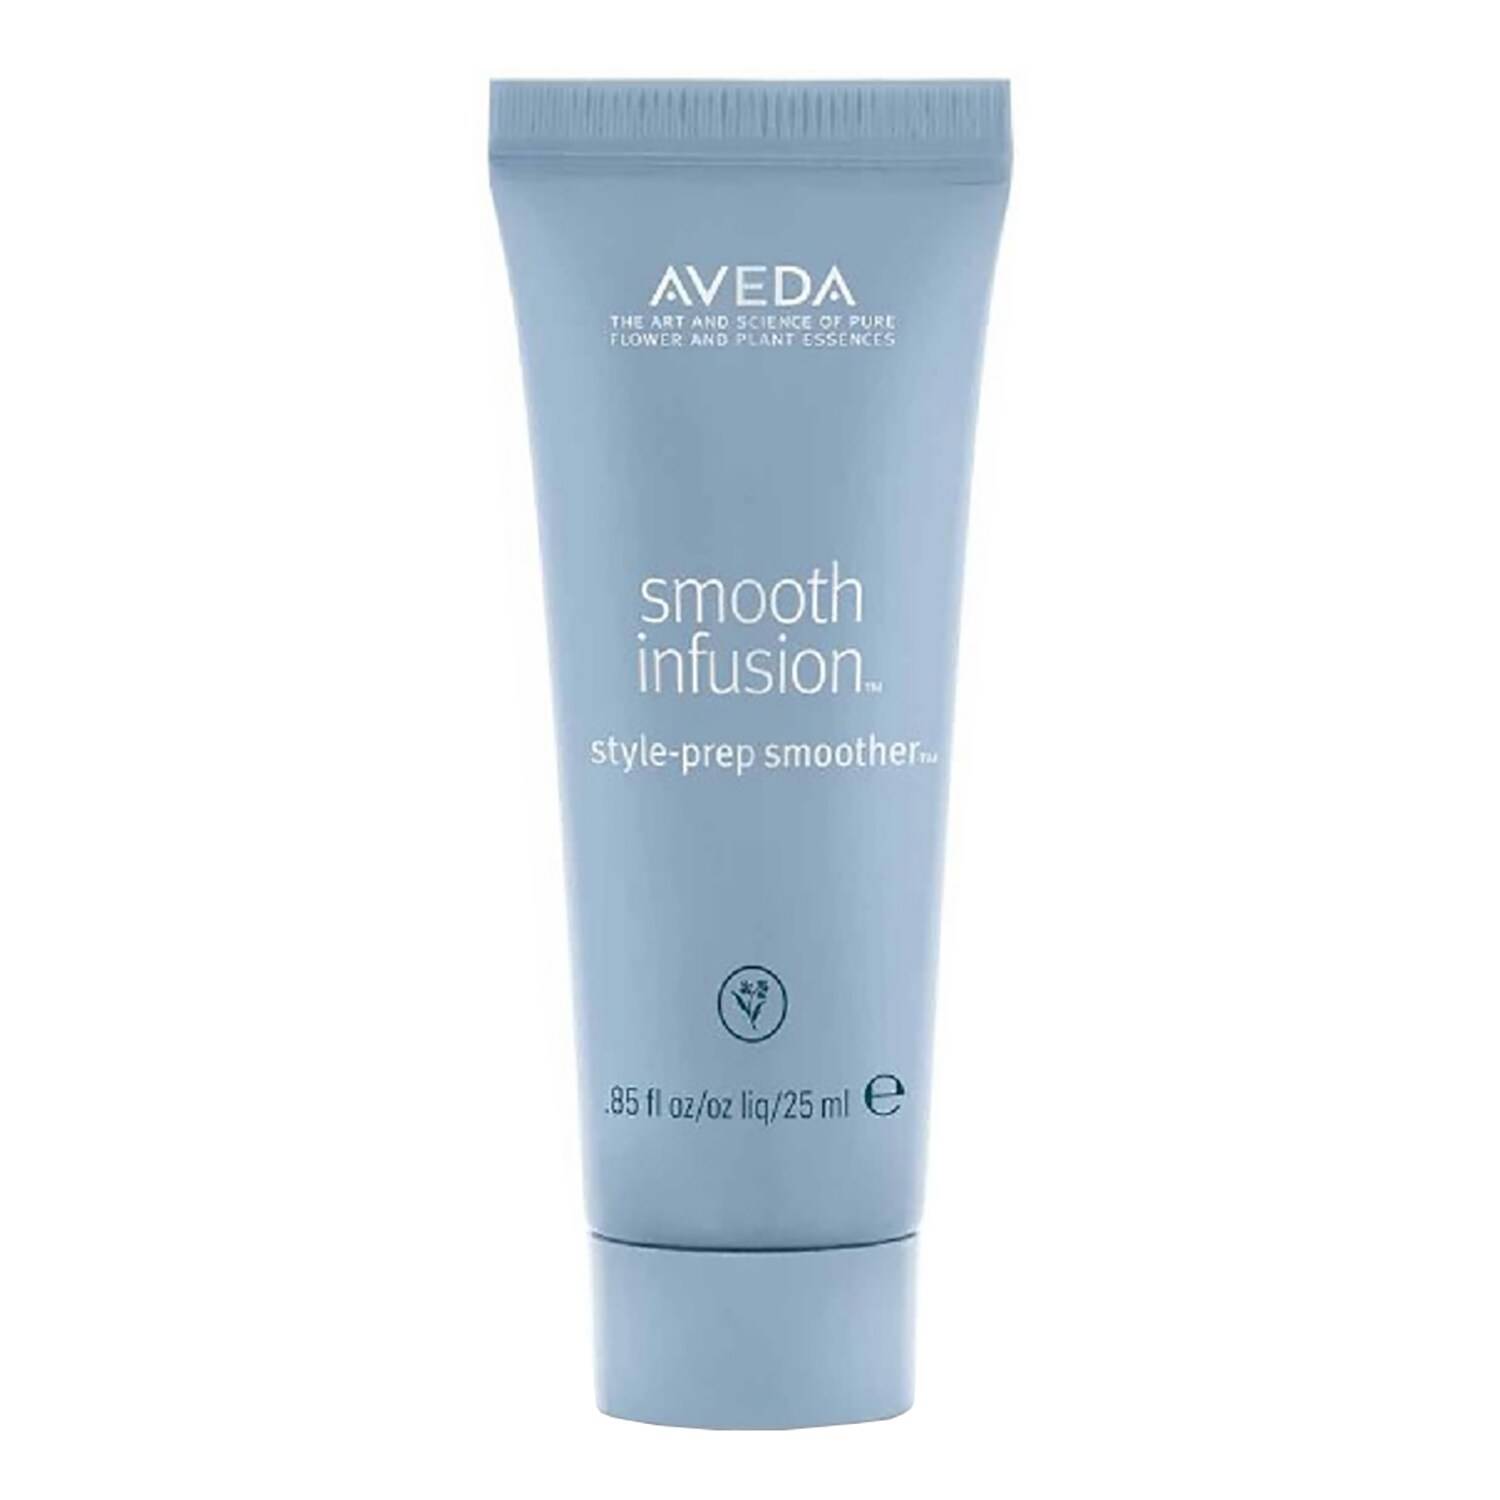 Aveda Smooth Infusion Style-Prep Smoother 25Ml